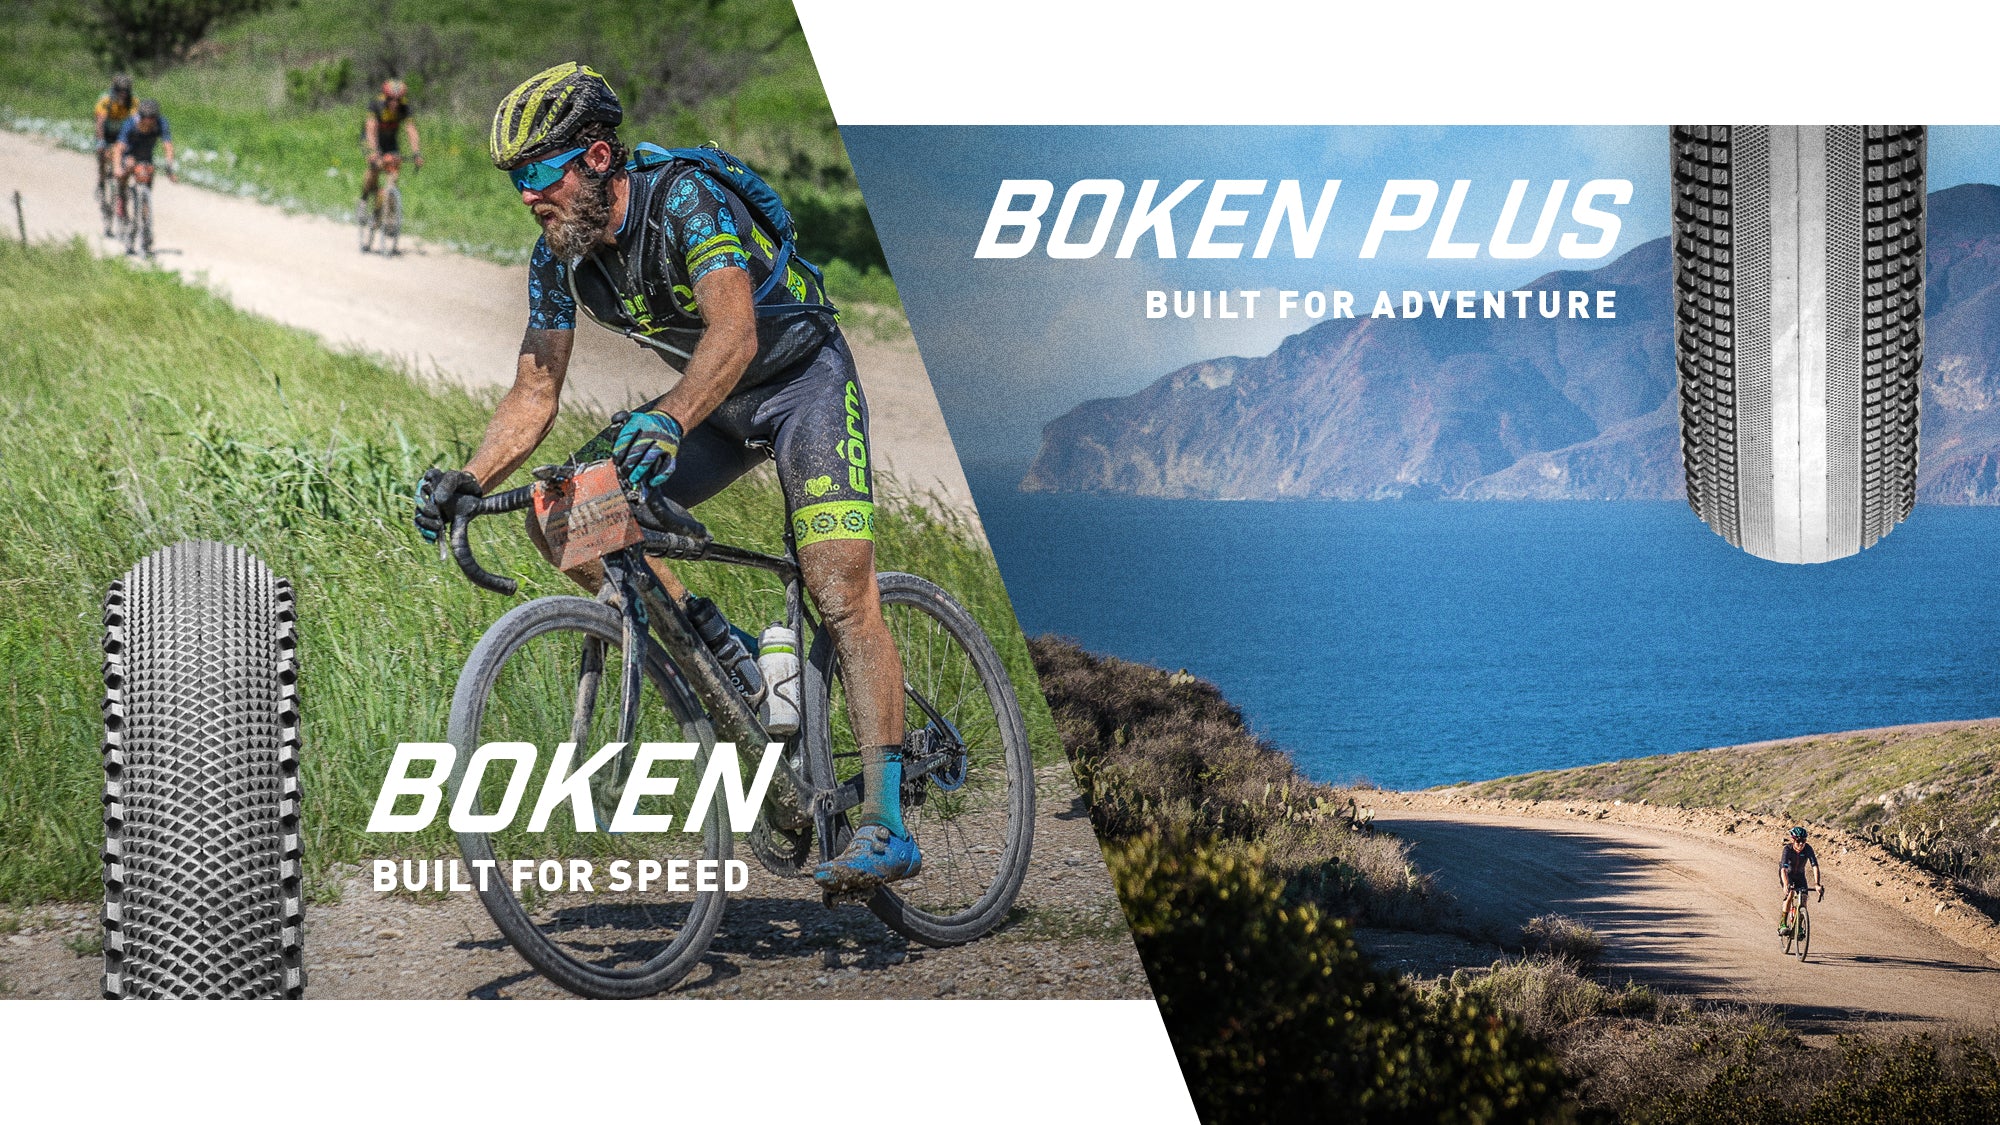 Boken: Built for Speed and Adventure